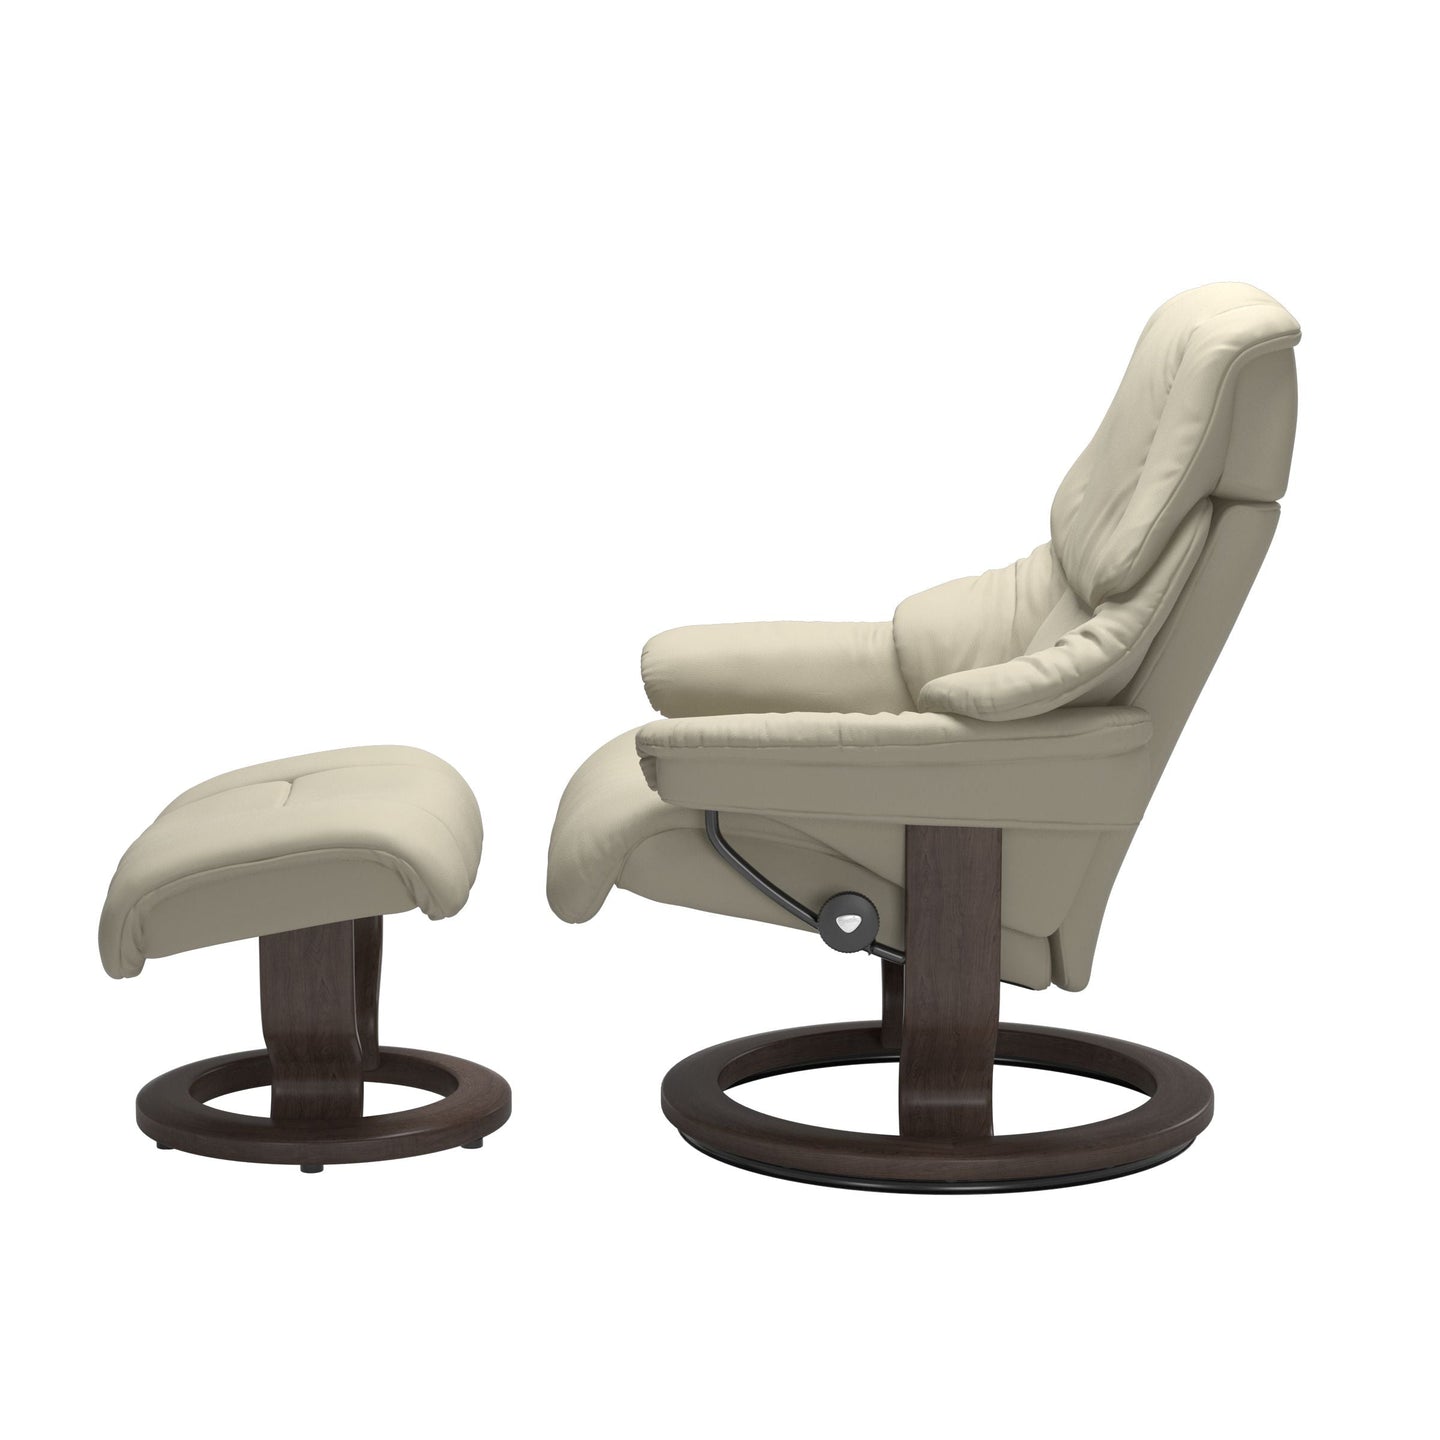 Stressless® Reno (L) Classic chair with footstool